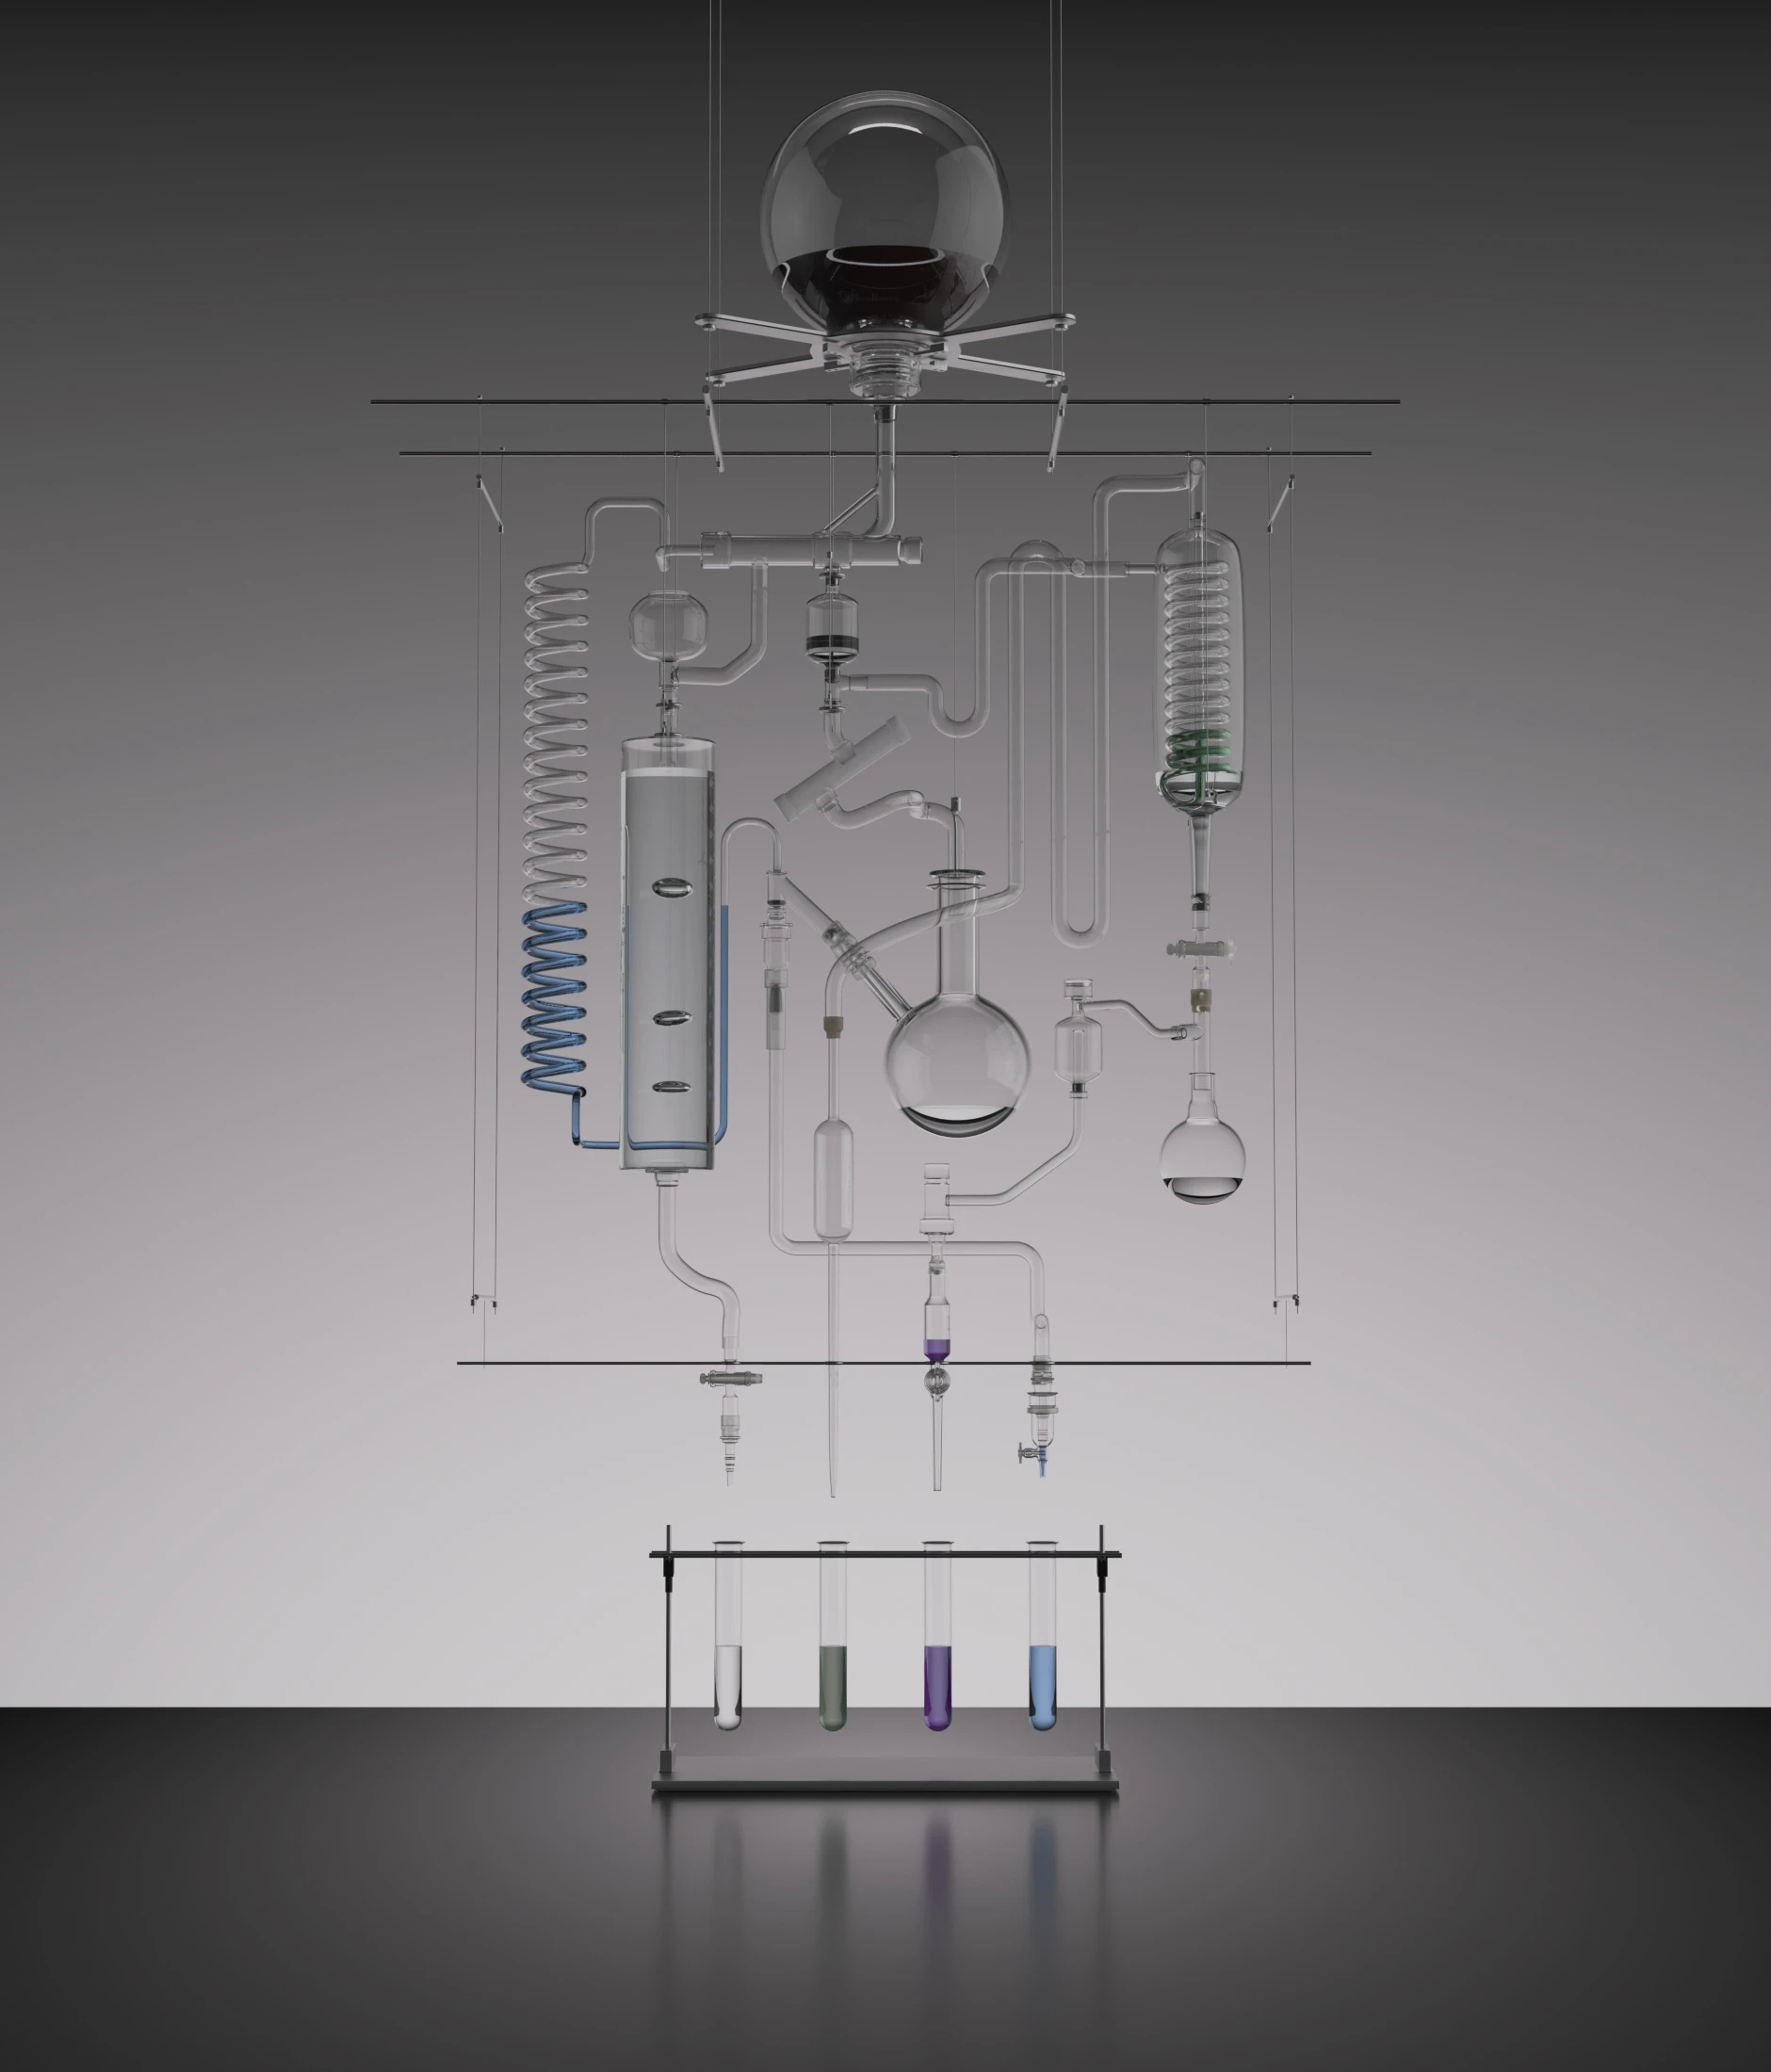 Image depicting a chemical apparatus for separating mixed substances